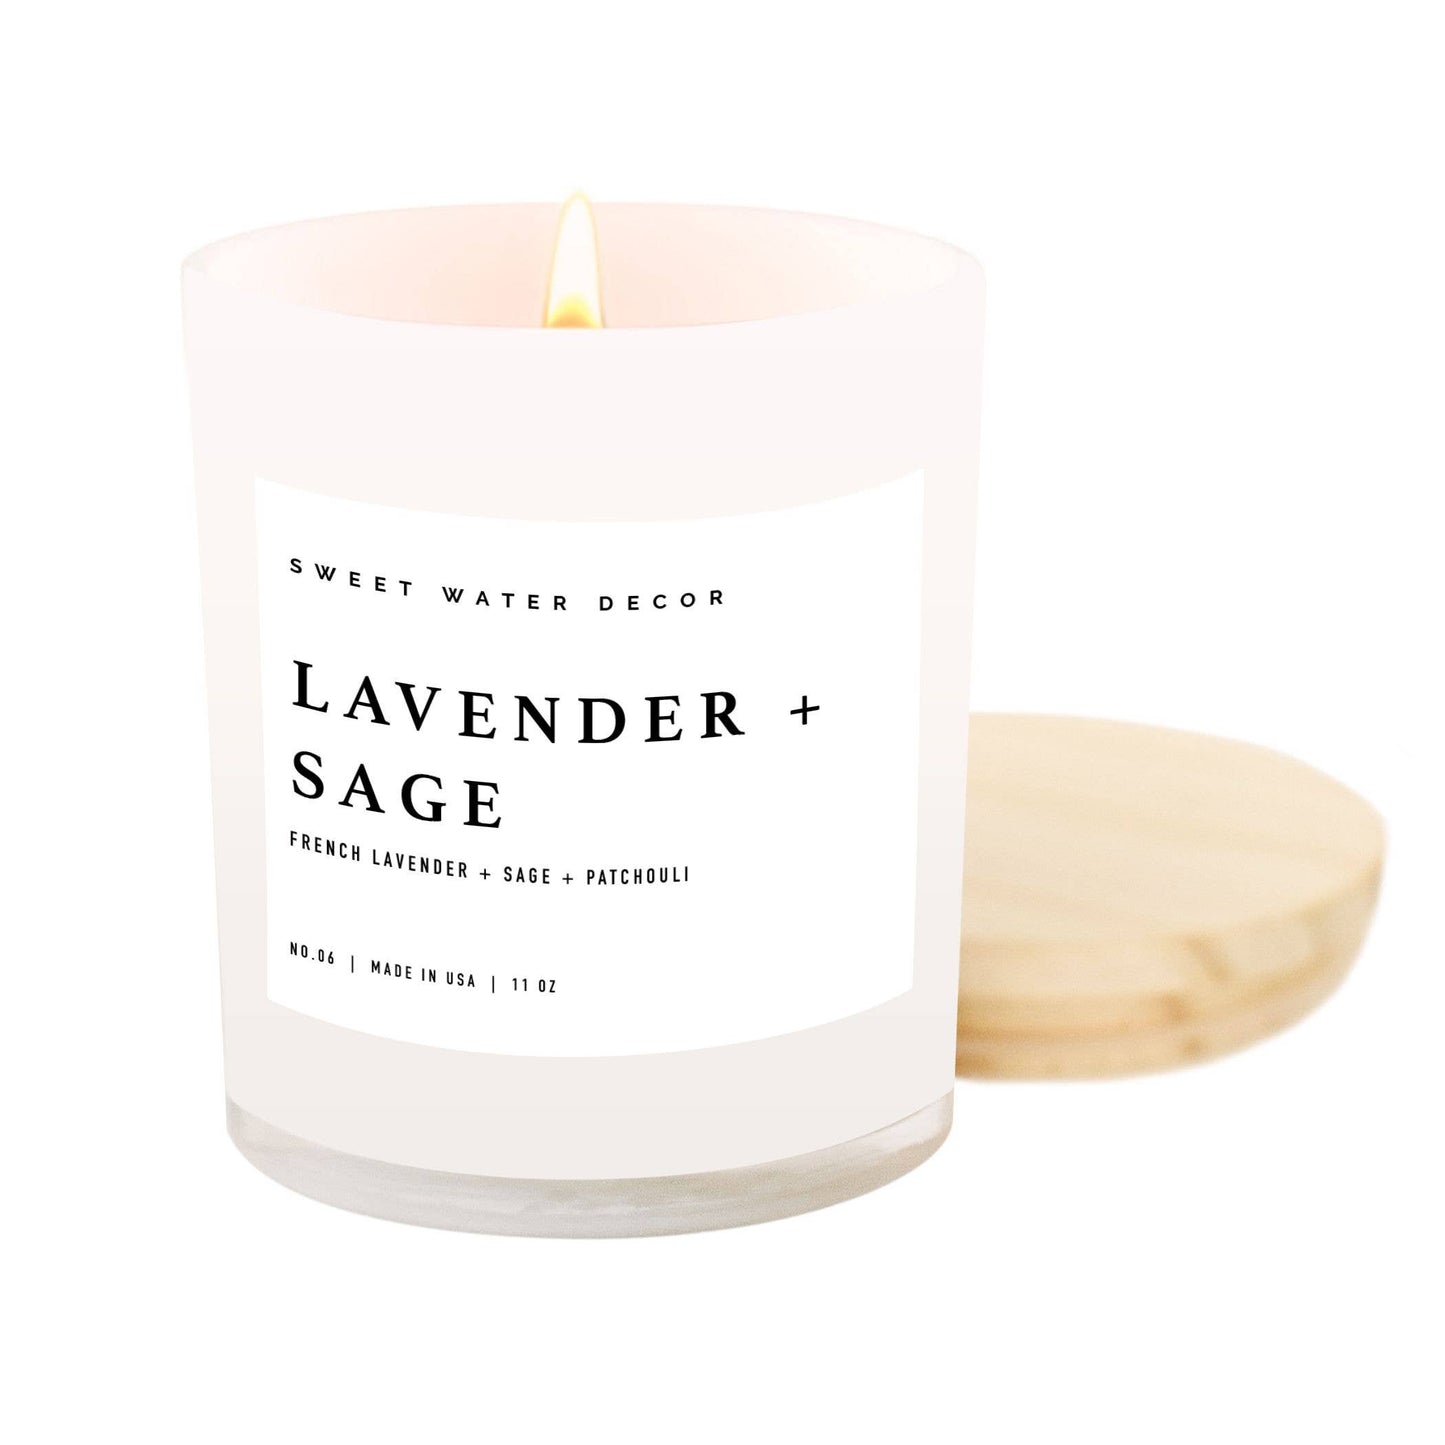 Lavender and Sage Soy Candle, 11 oz